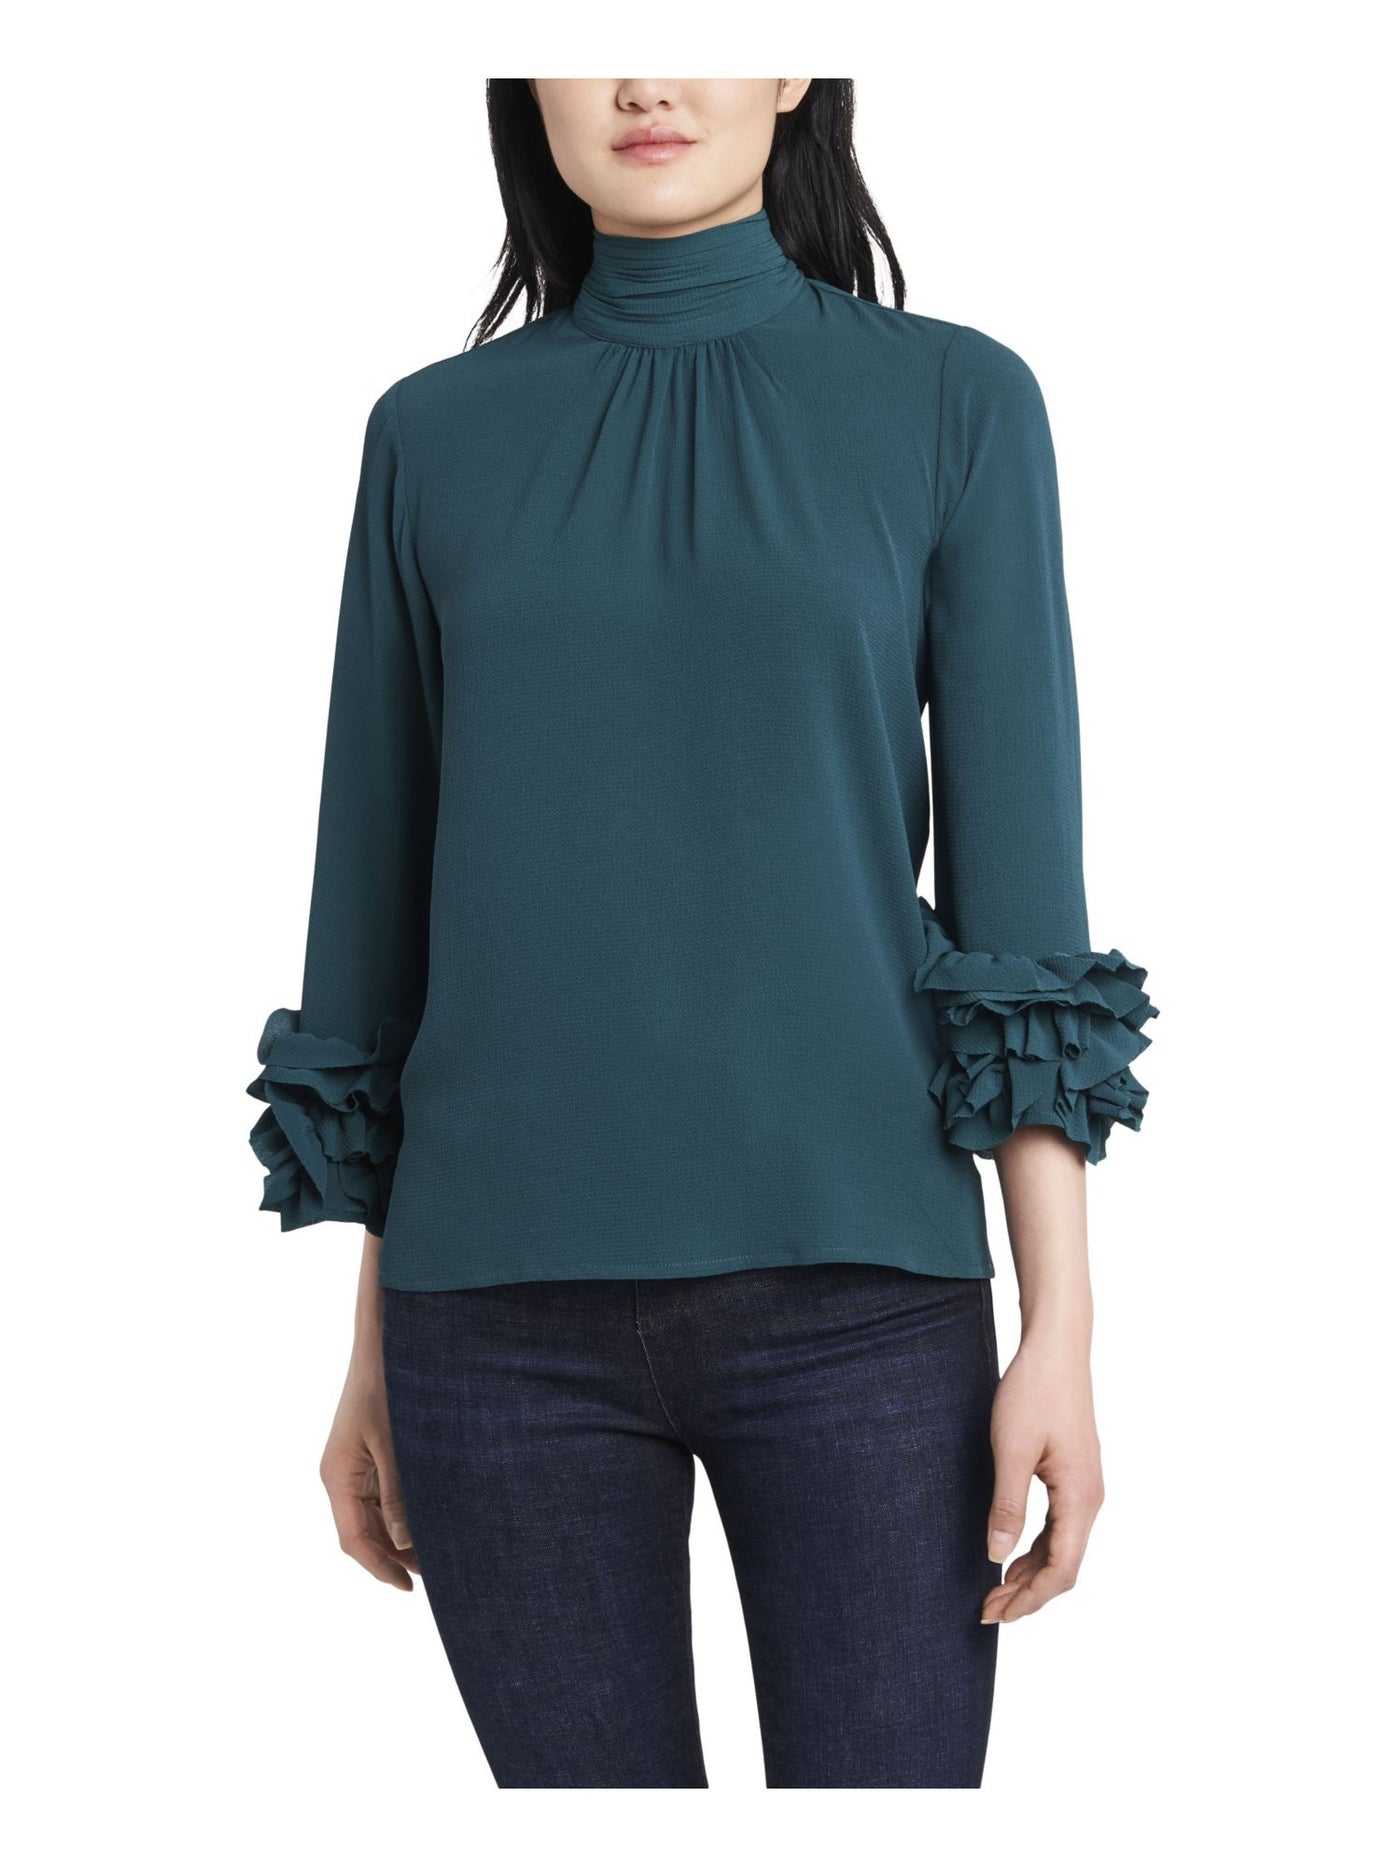 VINCE CAMUTO Womens Green Ruffled Gathered Keyhole Back 3/4 Sleeve Mock Neck Wear To Work Top L